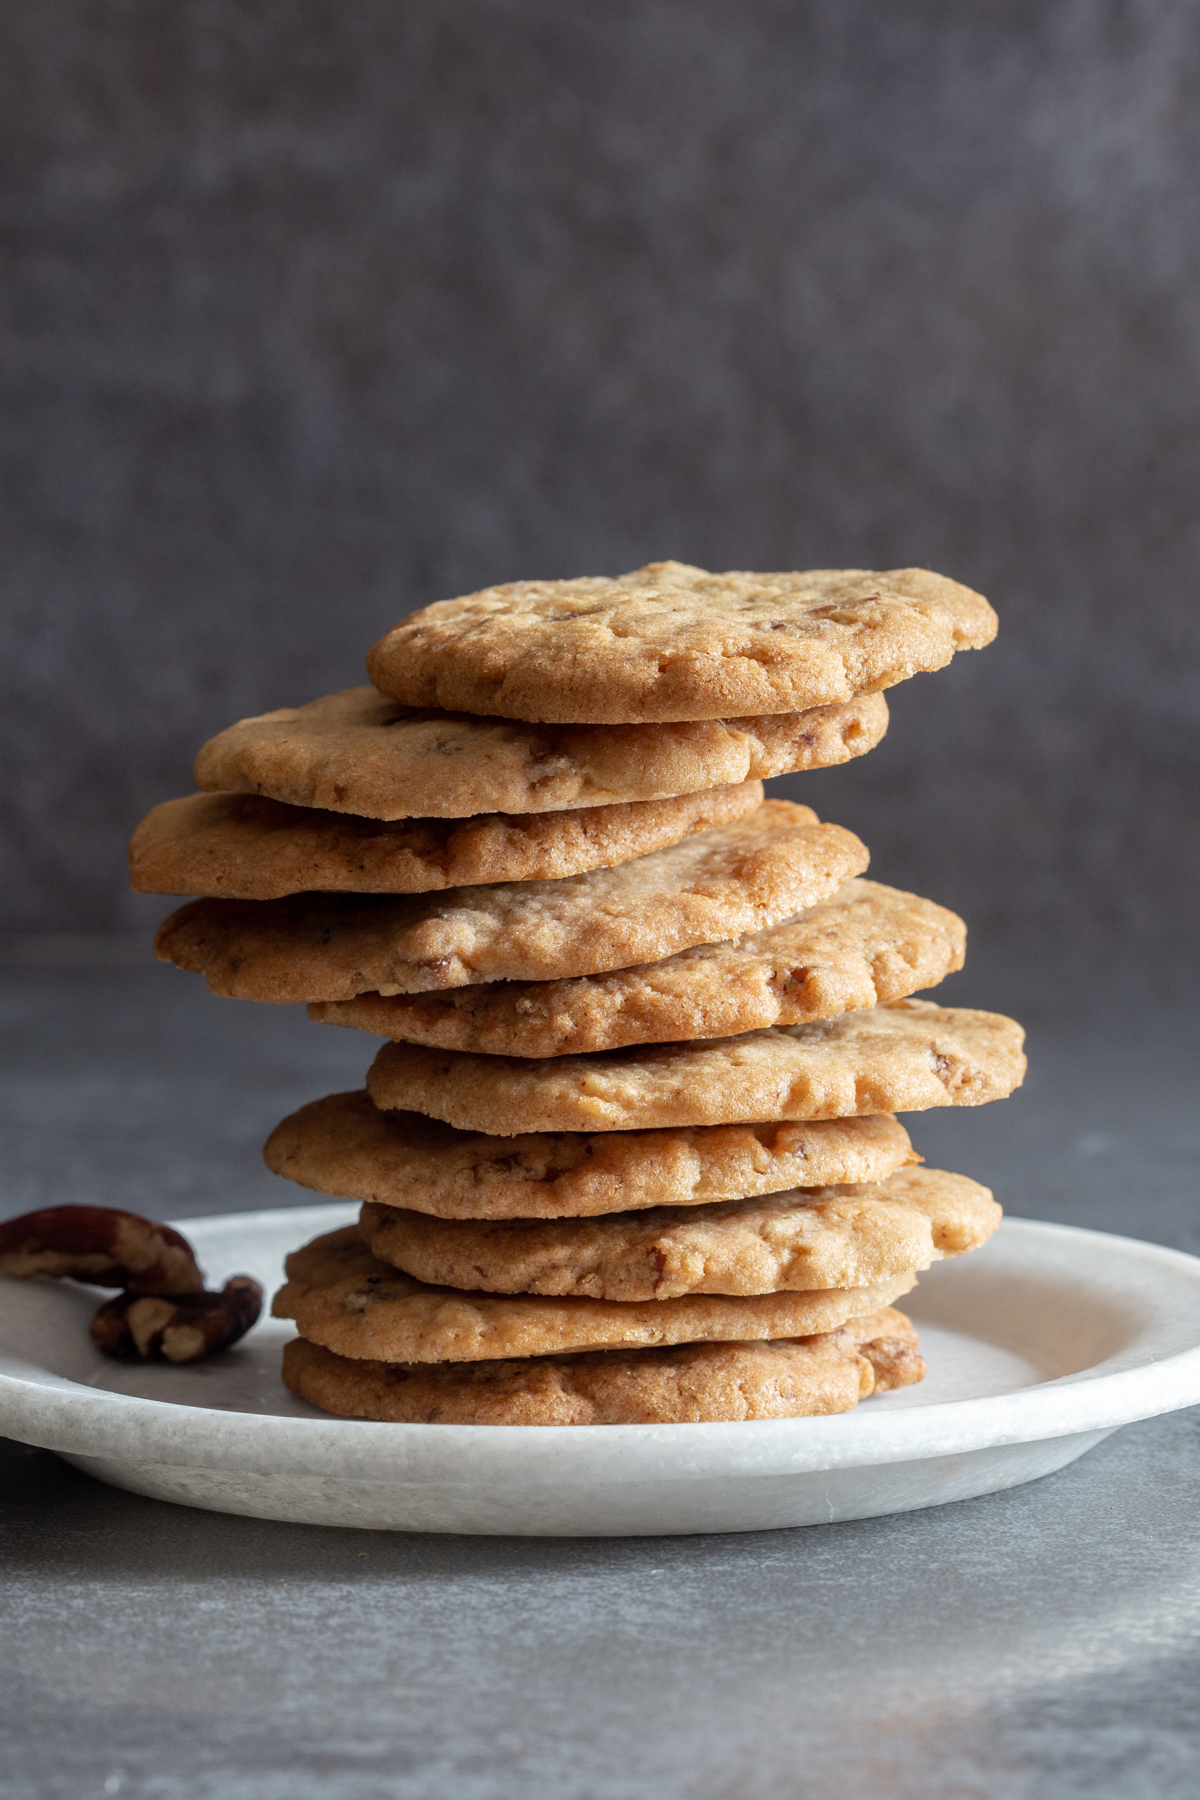 Pecan cookies stacked on a white plate.